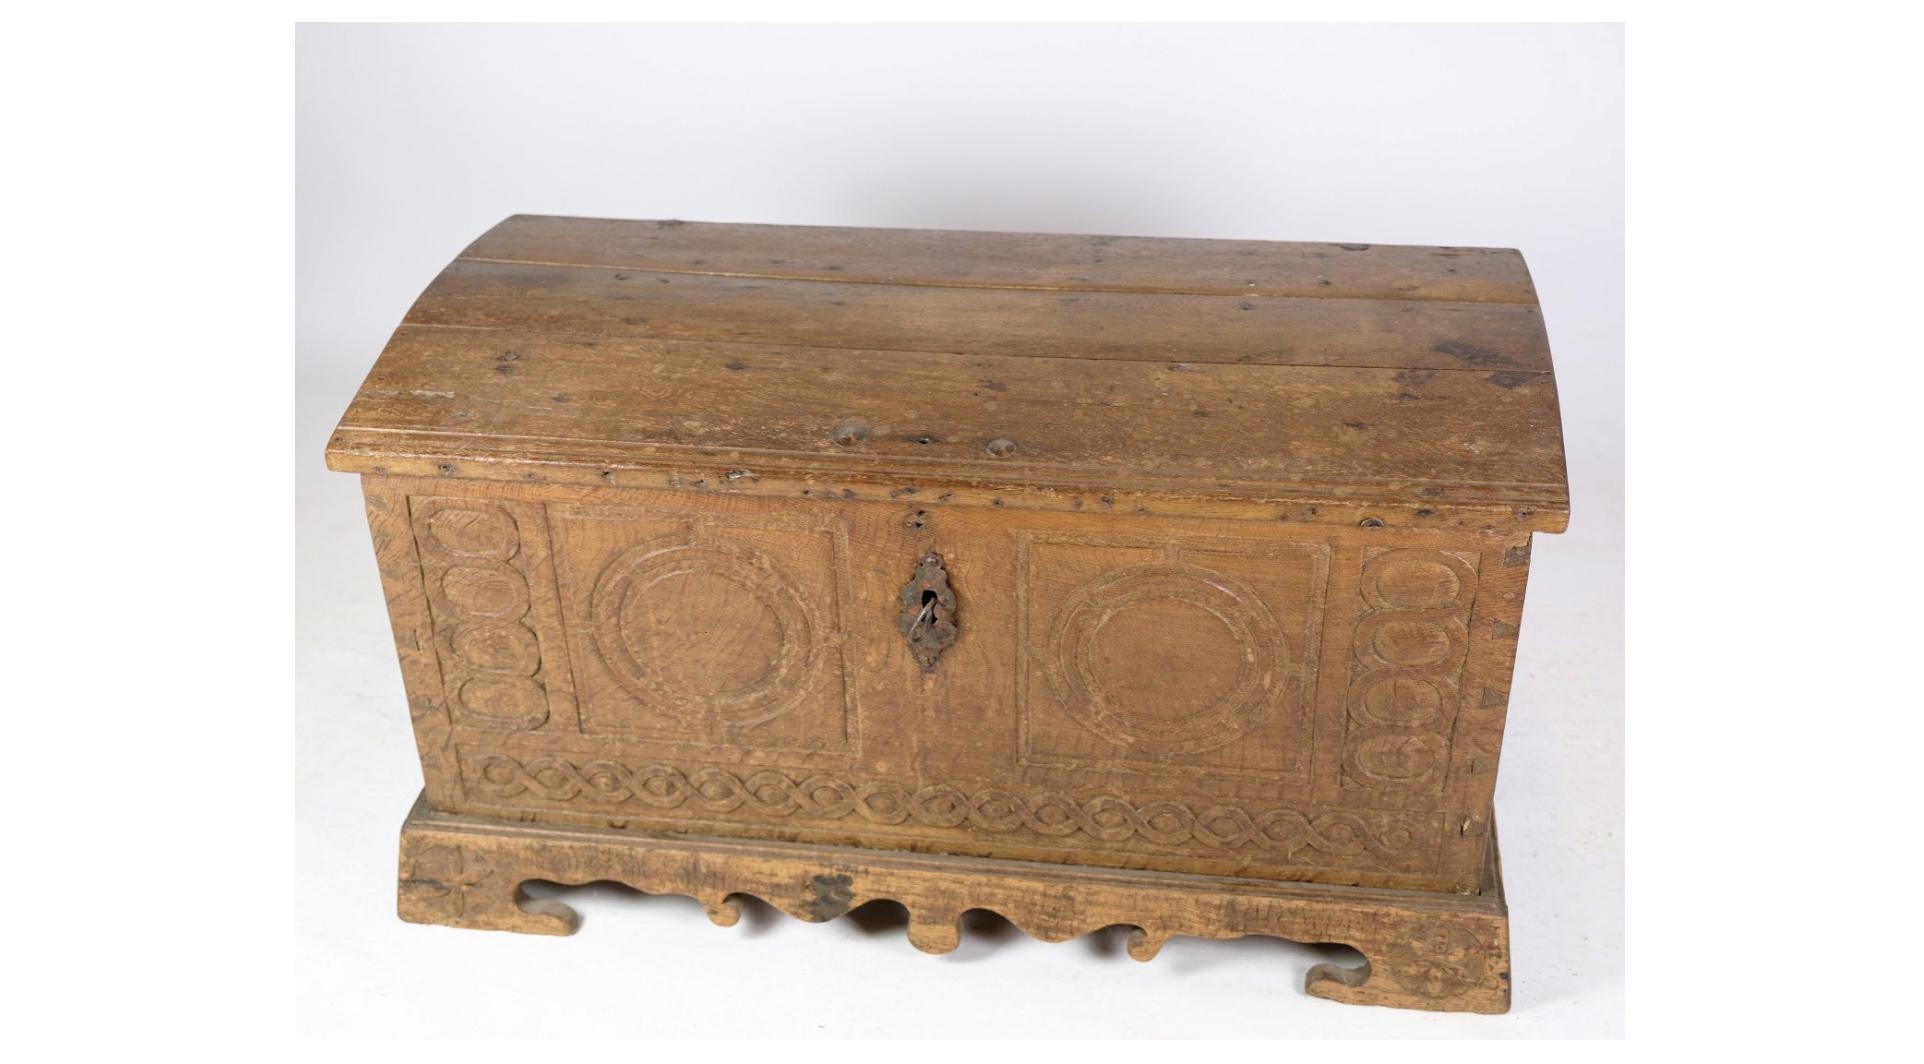 The Sønderjysk oak coffin with carvings from around the 1760s is a rare and extraordinary artifact that offers a glimpse into the funerary customs of the past. Crafted from solid oak, this coffin exhibits exceptional craftsmanship and attention to